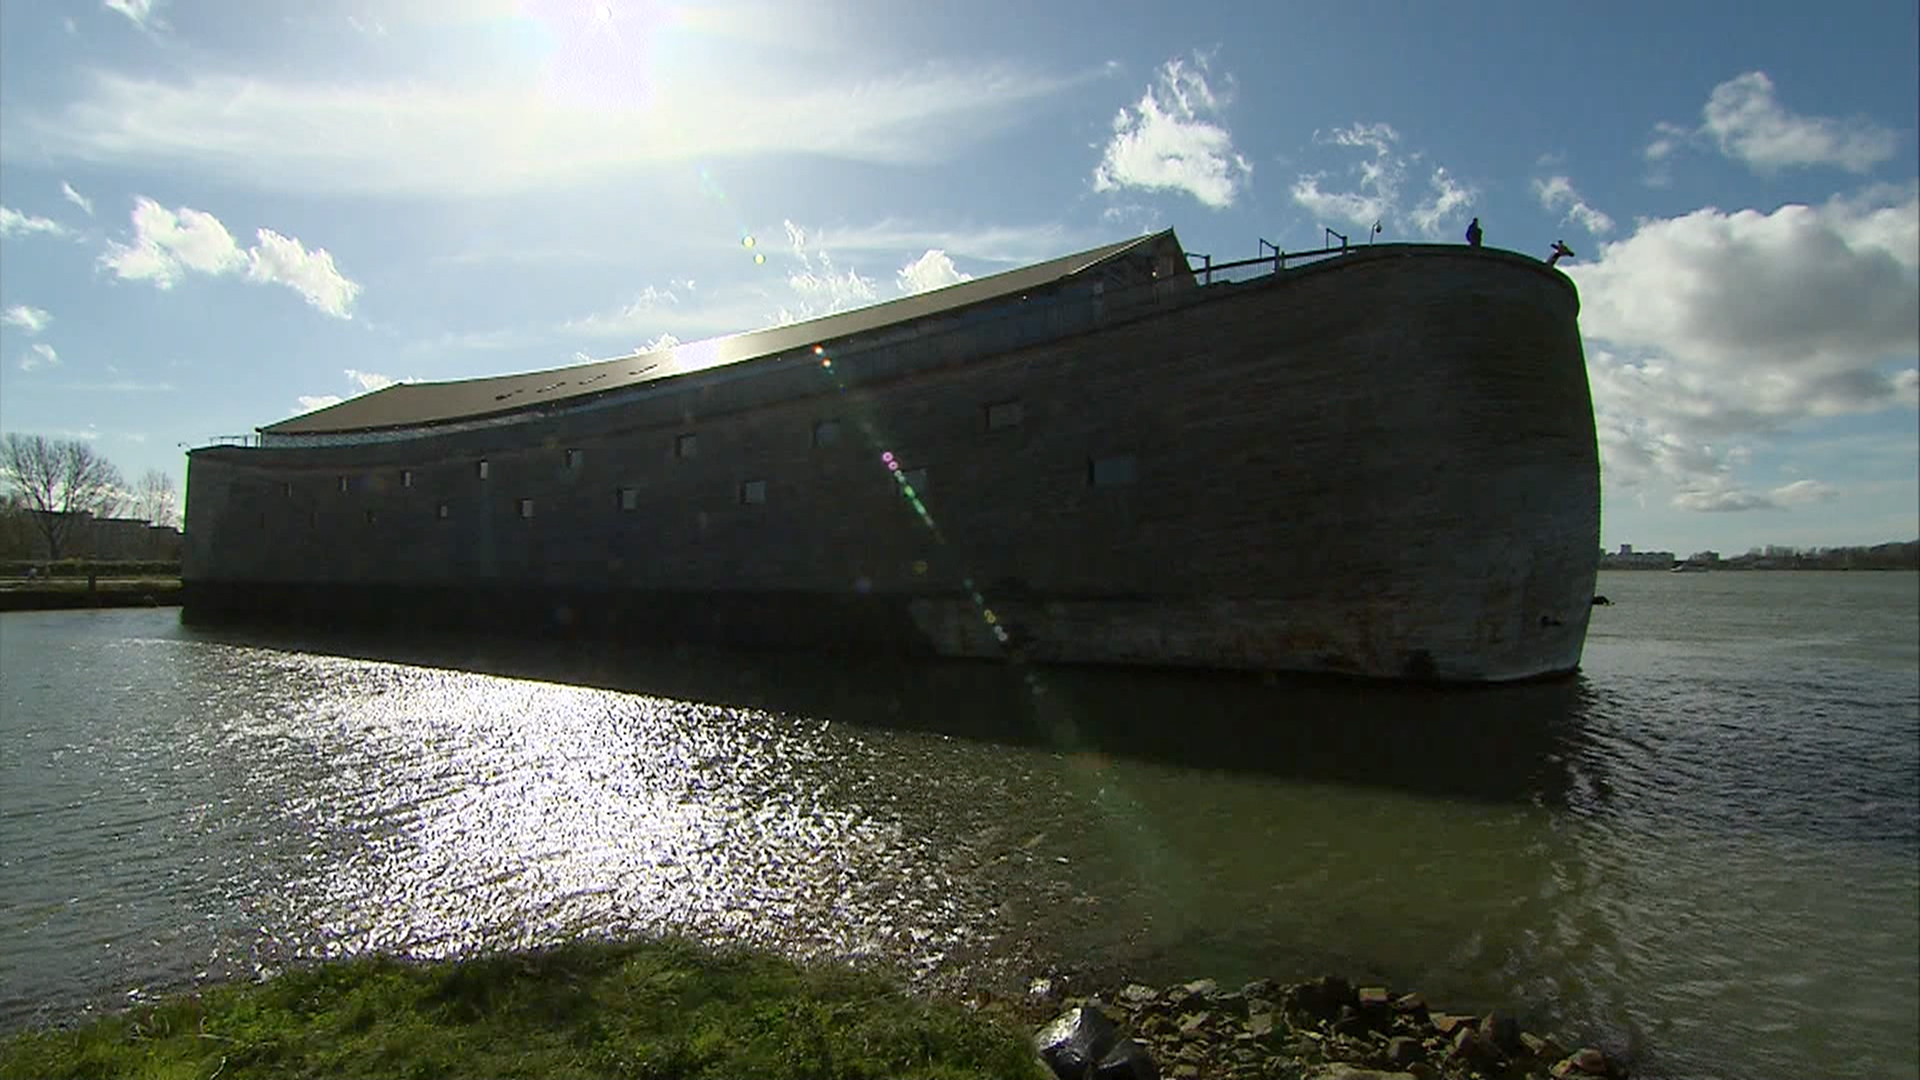 Life-size Noah's Ark replica draws tourists in Netherlands